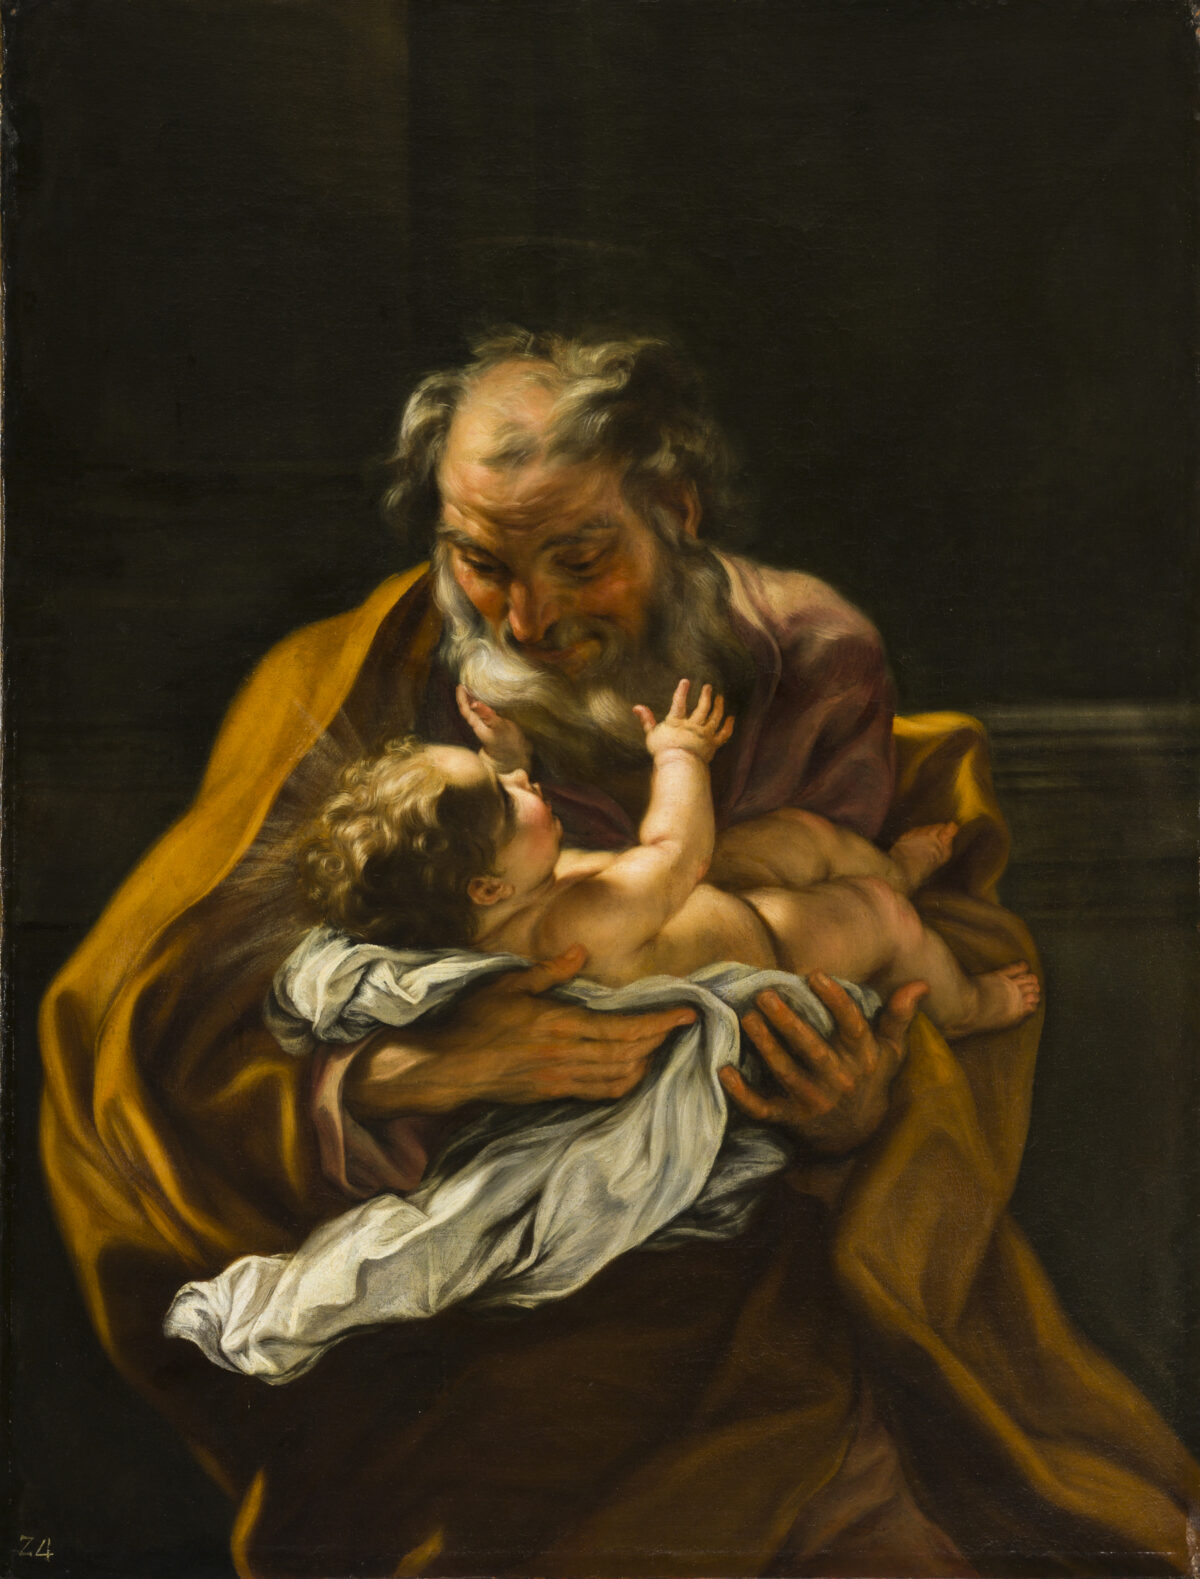 "Saint Joseph Embracing the Infant Christ," circa 1670–85, by Giovanni Battista Gaulli, commonly known as Baciccio. Oil on canvas; 50 inches by 38 1/4 inches. (The Norton Simon Foundation)